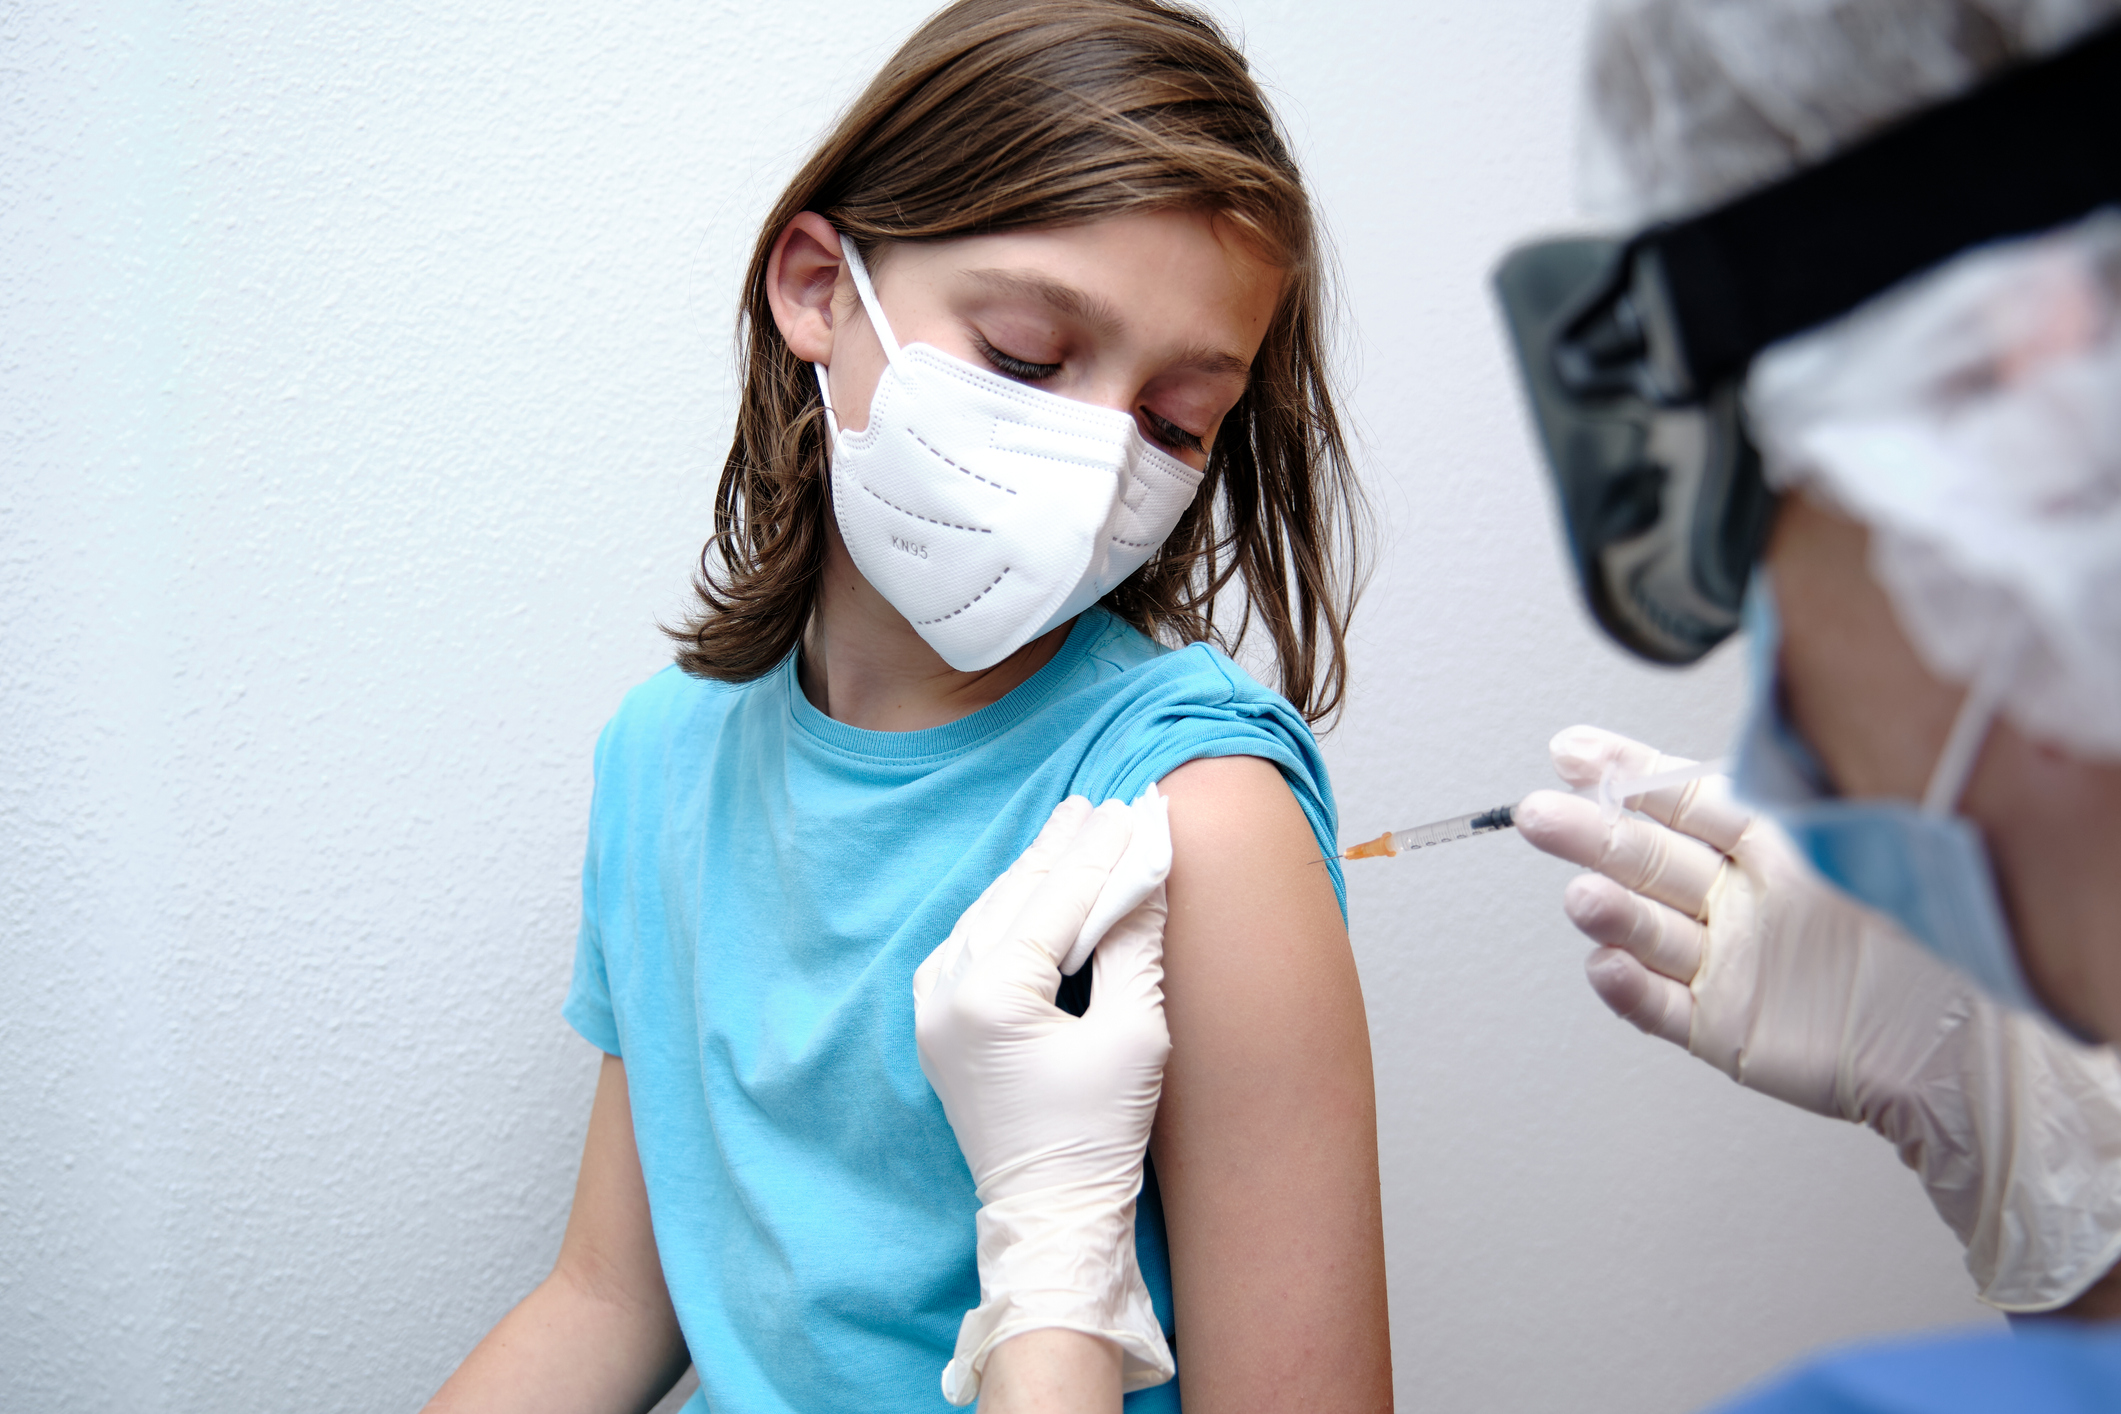 Covid Jab All You Need to Know About Your kids Getting Vaccinated 11 key Questions!